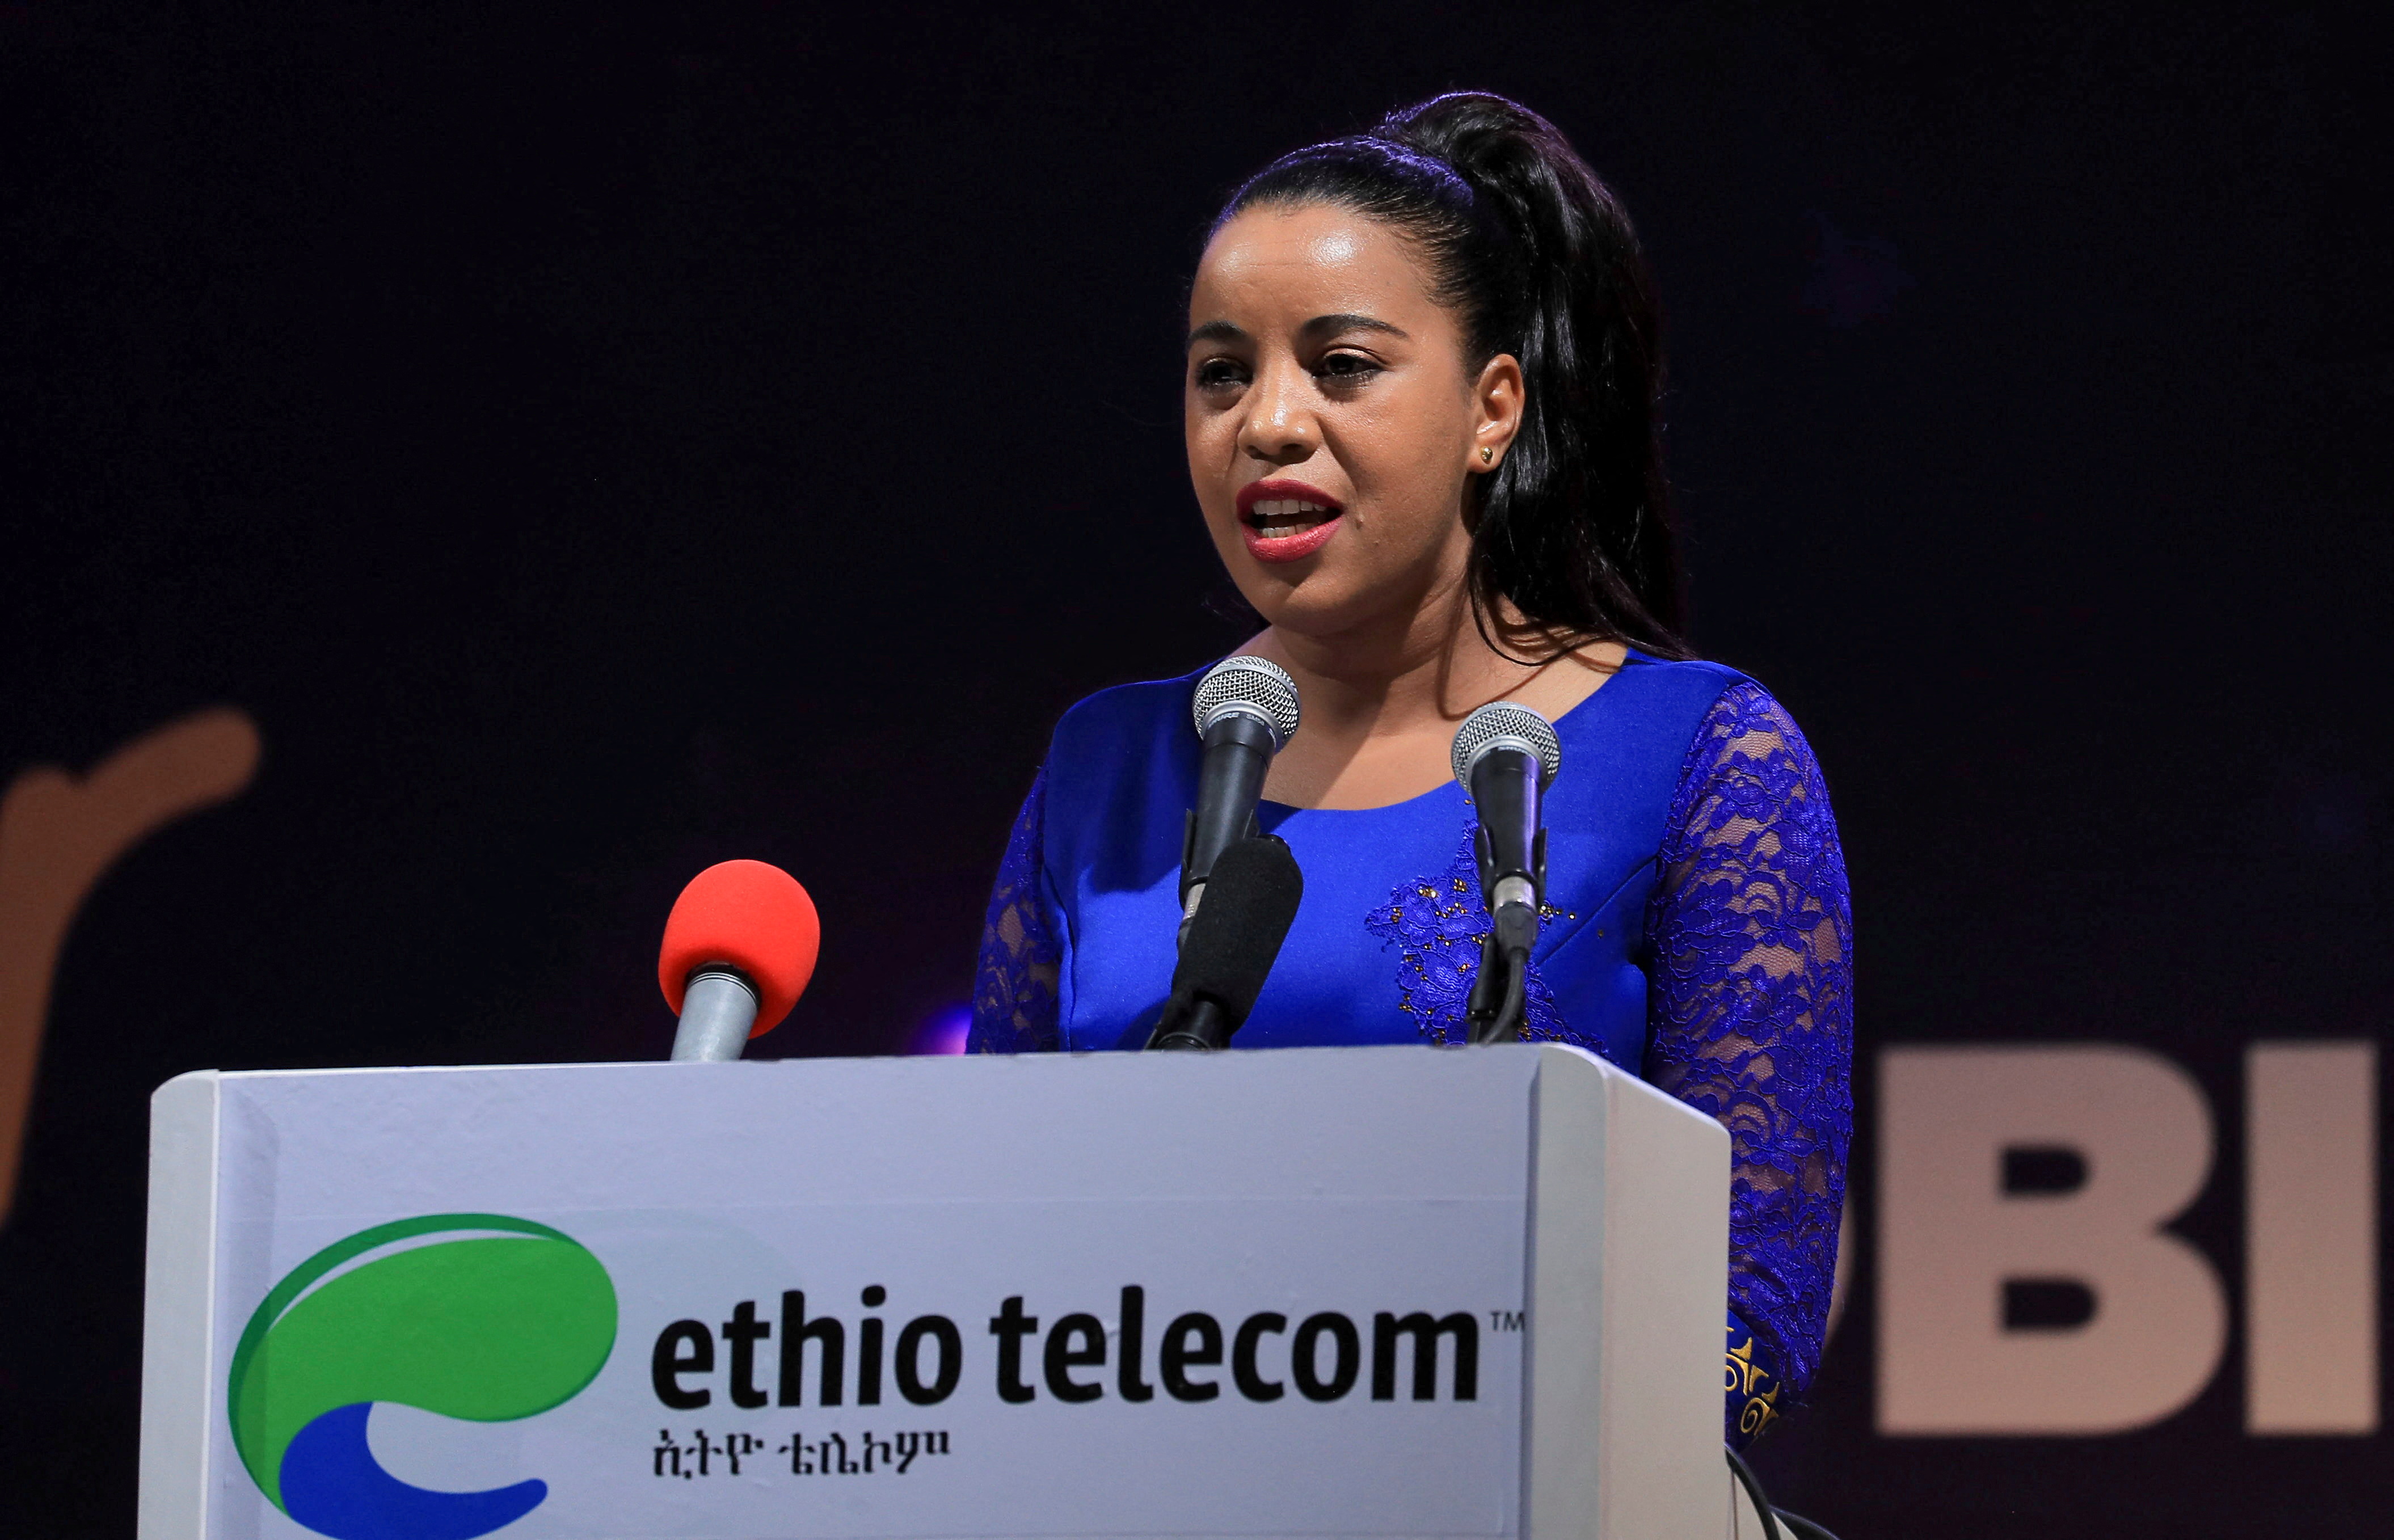 Ethio-Telecom Chief Executive Officer, Frehiwot Tamru addresses delegates during the launch of a mobile phone-based financial service named Telebirr mobile money service, in Addis Ababa